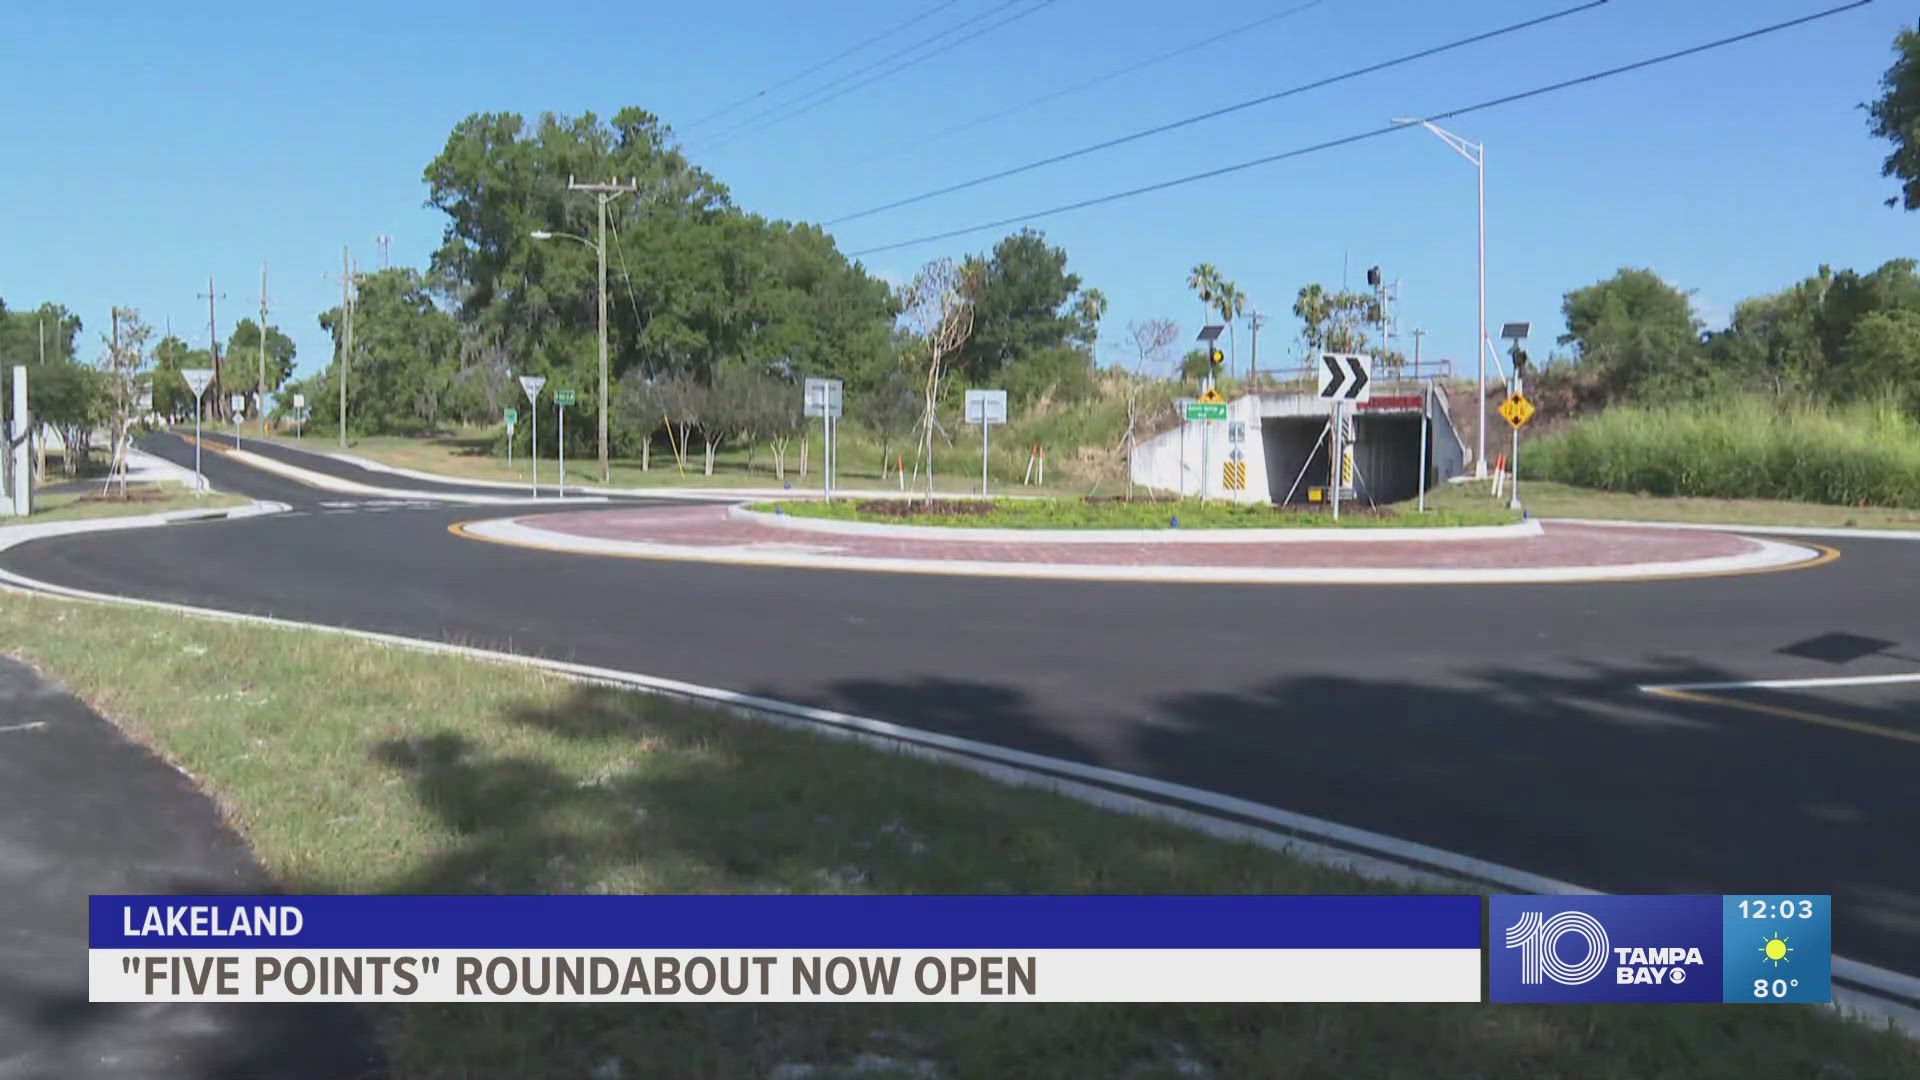 Lakeland city leaders say this new roundabout will help traffic flow and improve safety in the area. It opened 3 months ahead of schedule.